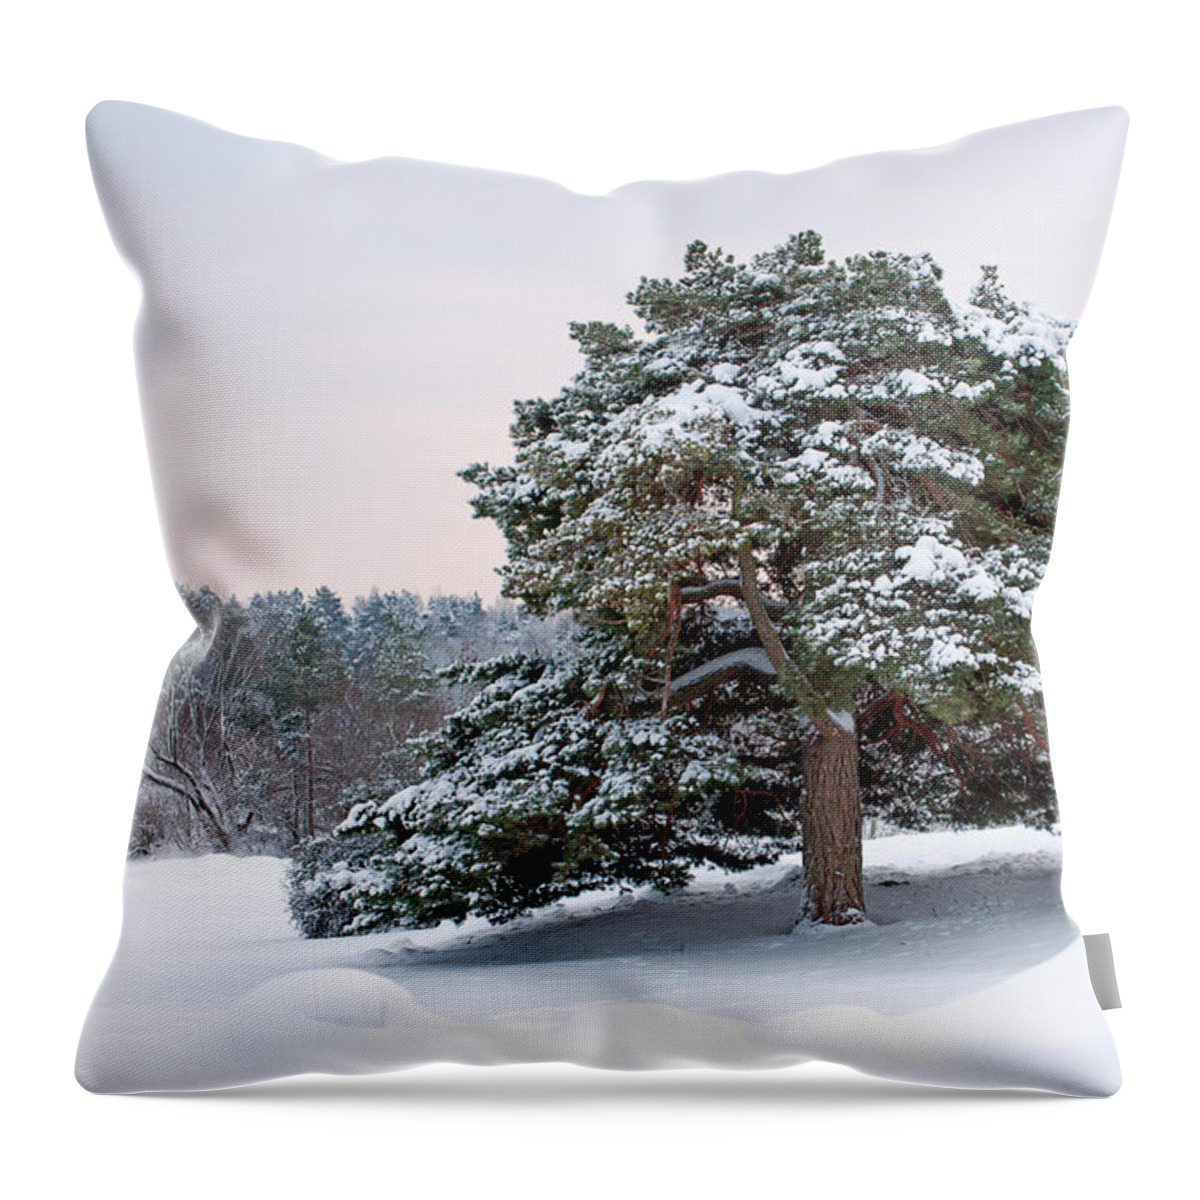 Solitude Throw Pillow featuring the photograph Solitude by Torbjorn Swenelius